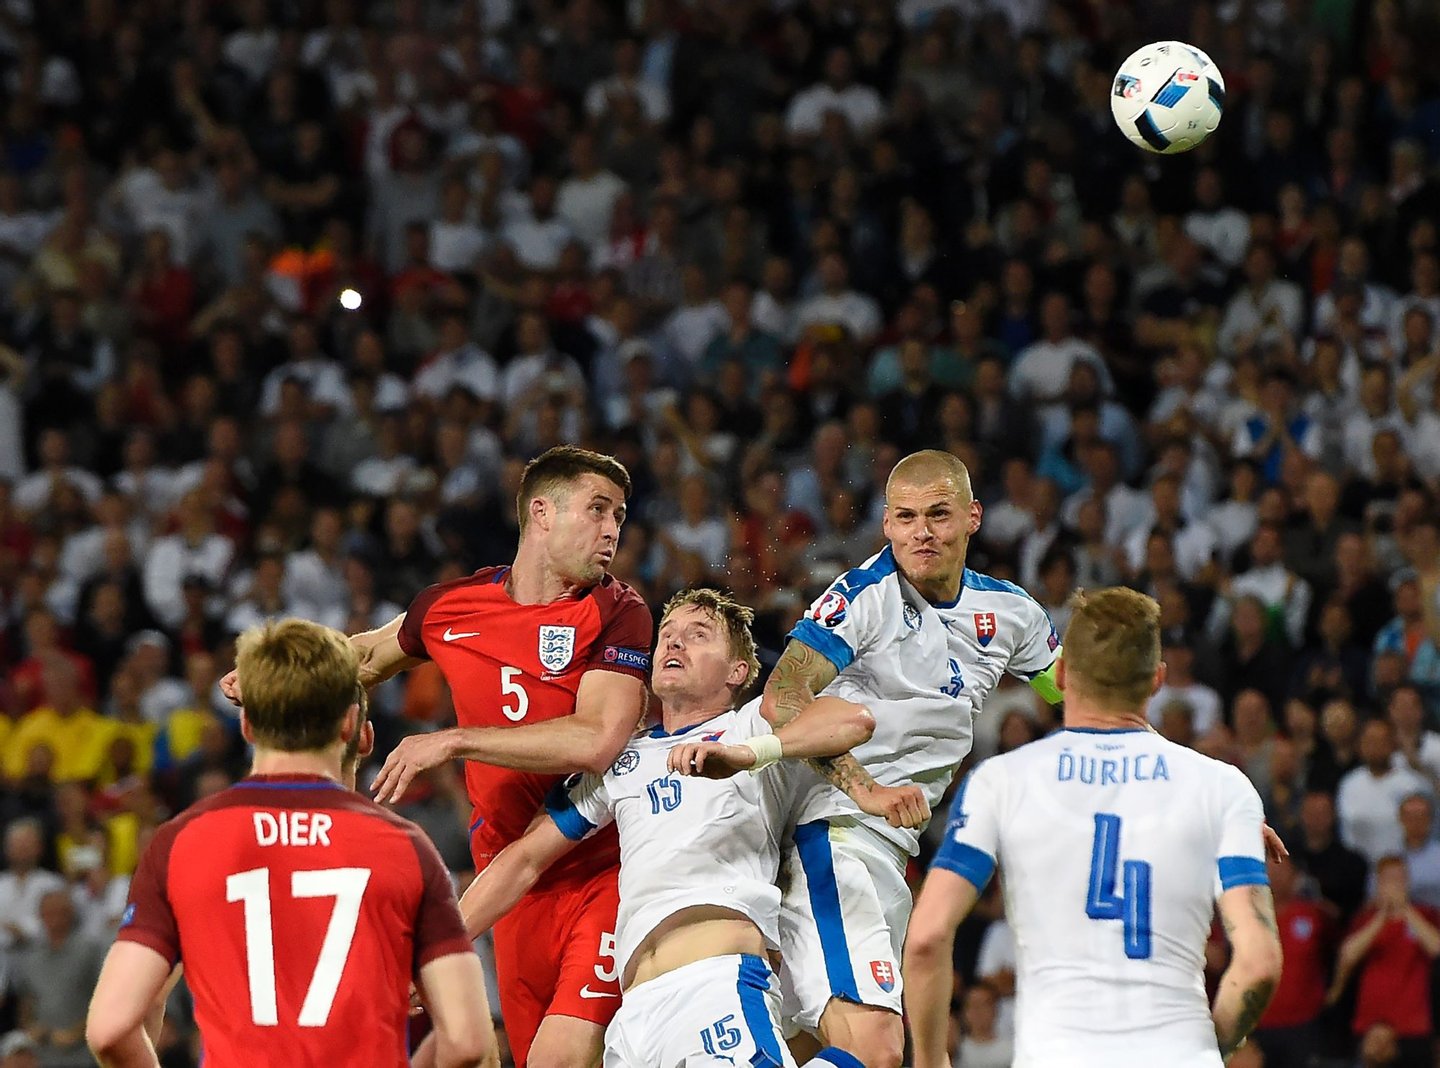 England's defender Gary Cahill (C-L) vies for the header with Slovakia's defender Tomas Hubocan (C) and Slovakia's defender Martin Skrtel (C-R) during the Euro 2016 group B football match between Slovakia and England at the Geoffroy-Guichard stadium in Saint-Etienne on June 20, 2016. / AFP / Joe KLAMAR (Photo credit should read JOE KLAMAR/AFP/Getty Images)